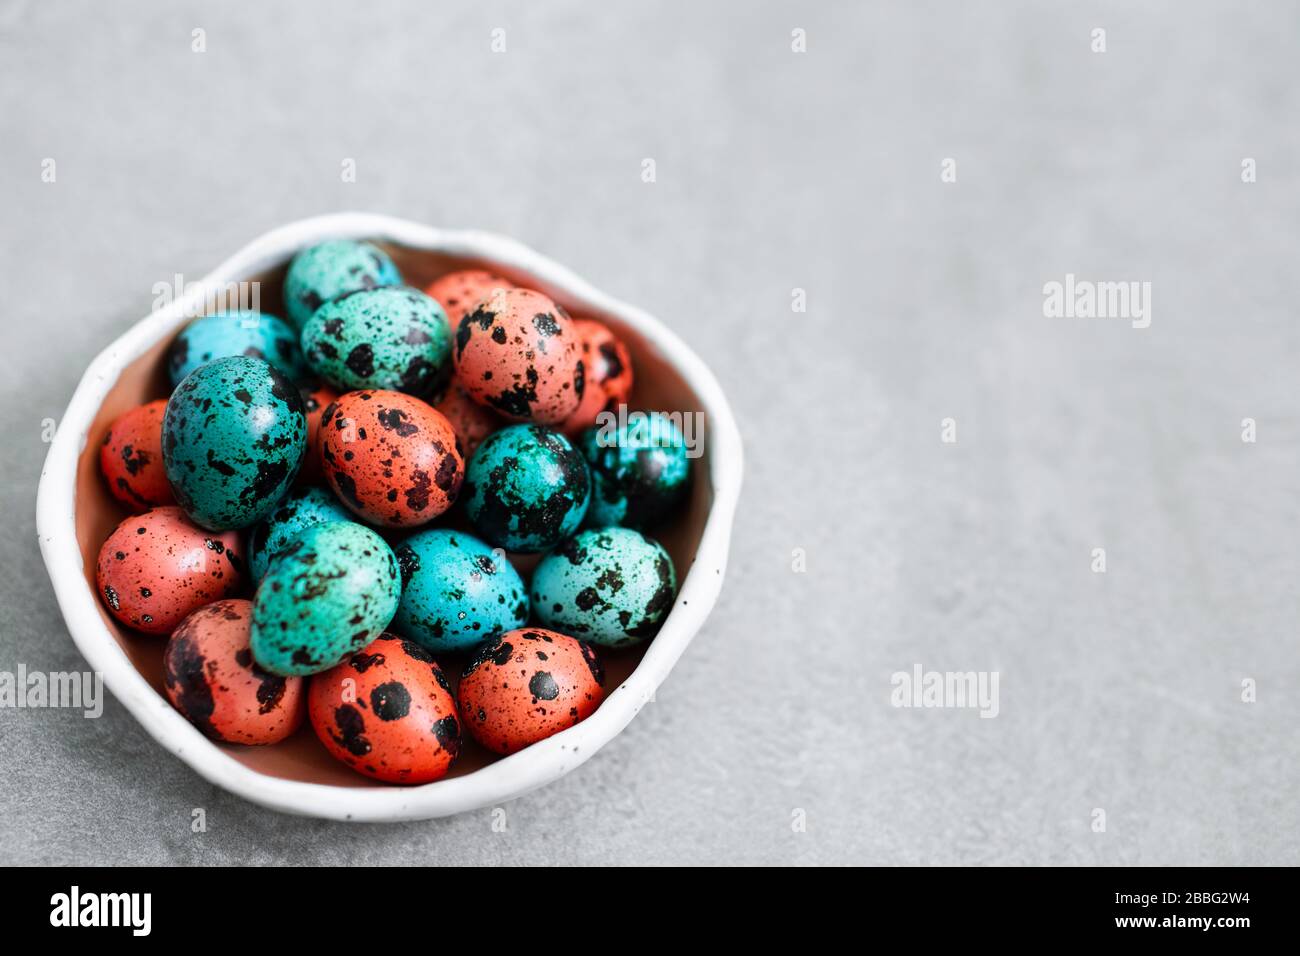 Painted red and blue quail eggs for Easter in small ceramic plate on ...